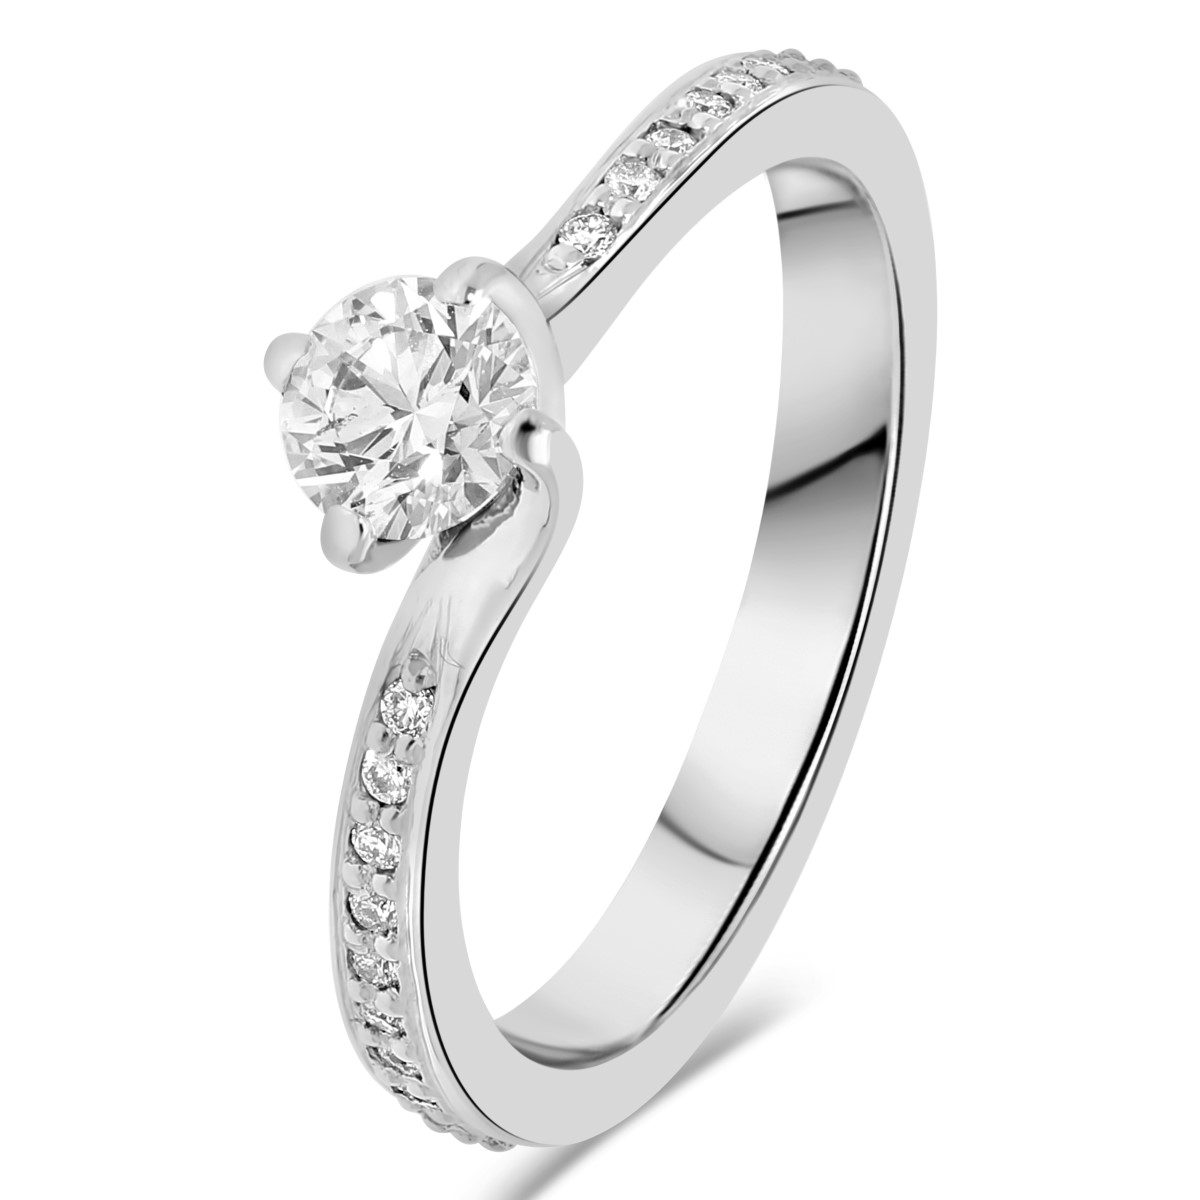 hivaoa-solitaires-diamants-certifies-accompagne-or-blanc-750-